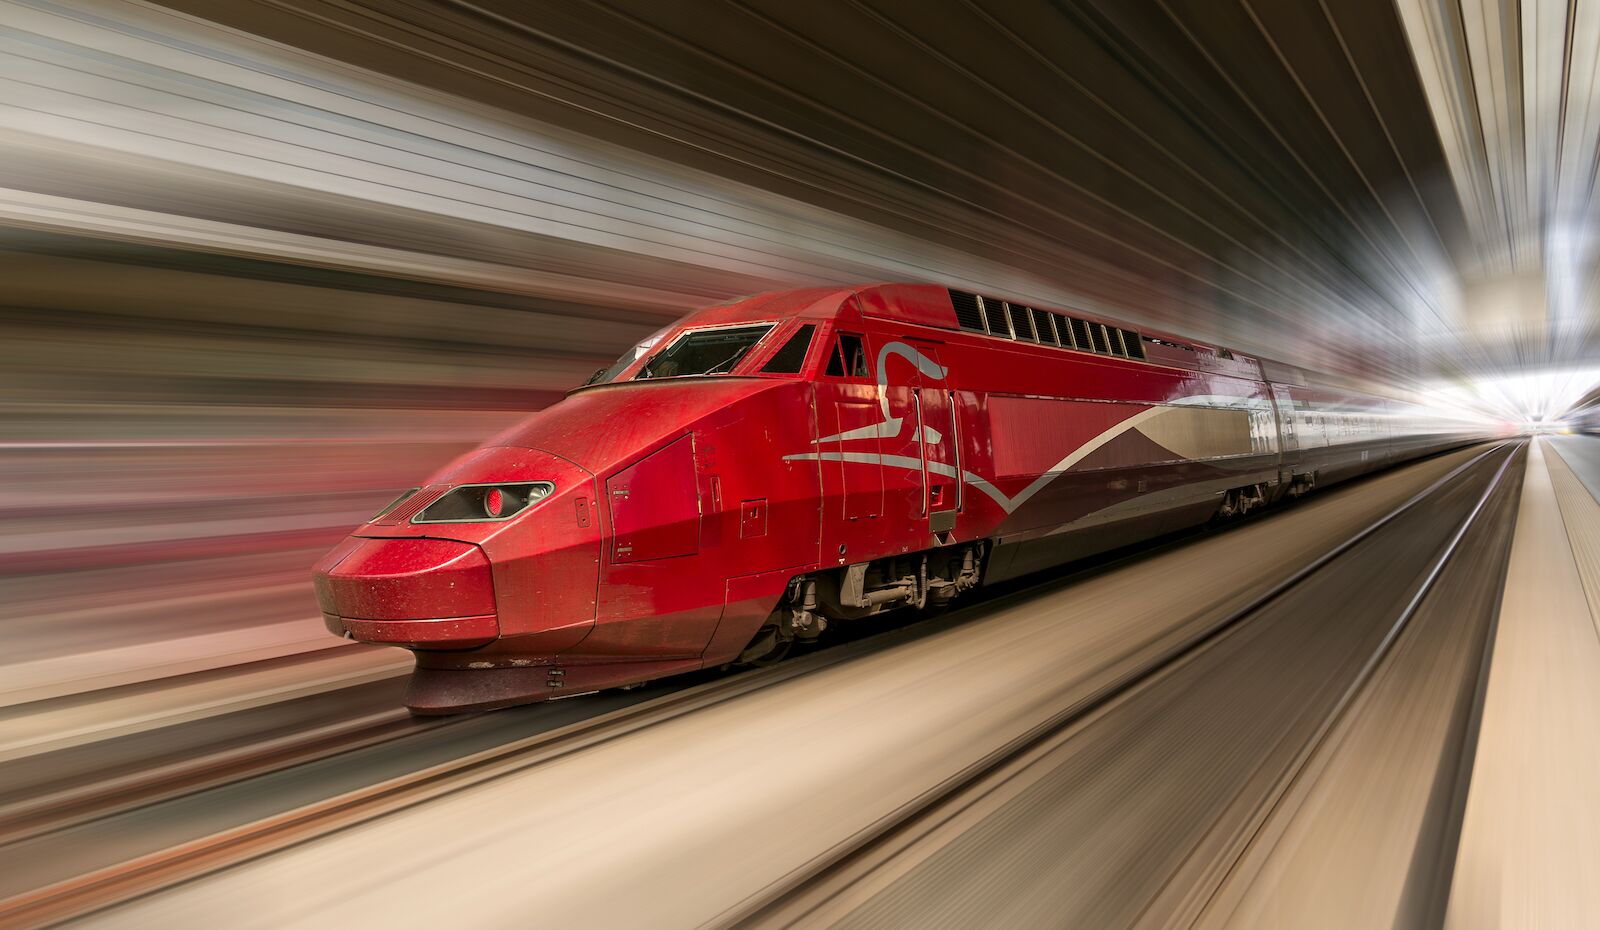 The high-speed Thalys train runs between Amsterdam and Brussels multiple times per day